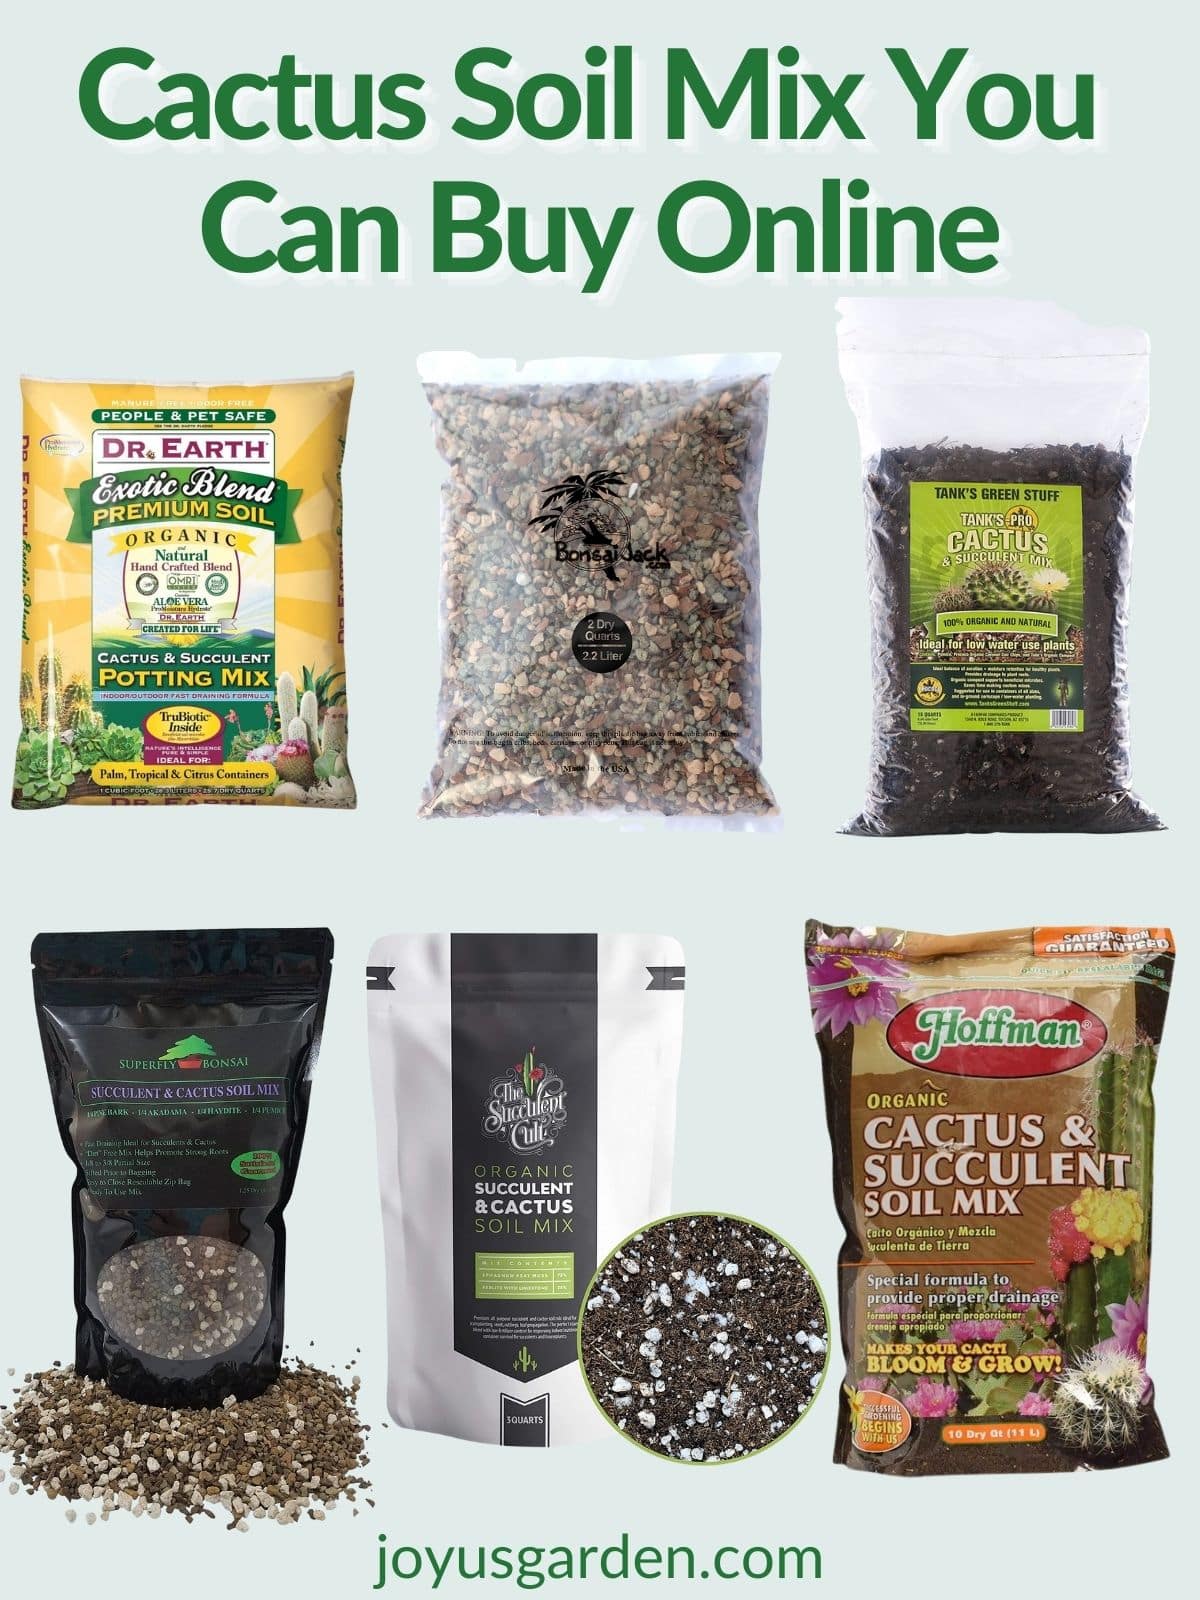 A collage showing 6 different brands of cactus mix you can buy online.